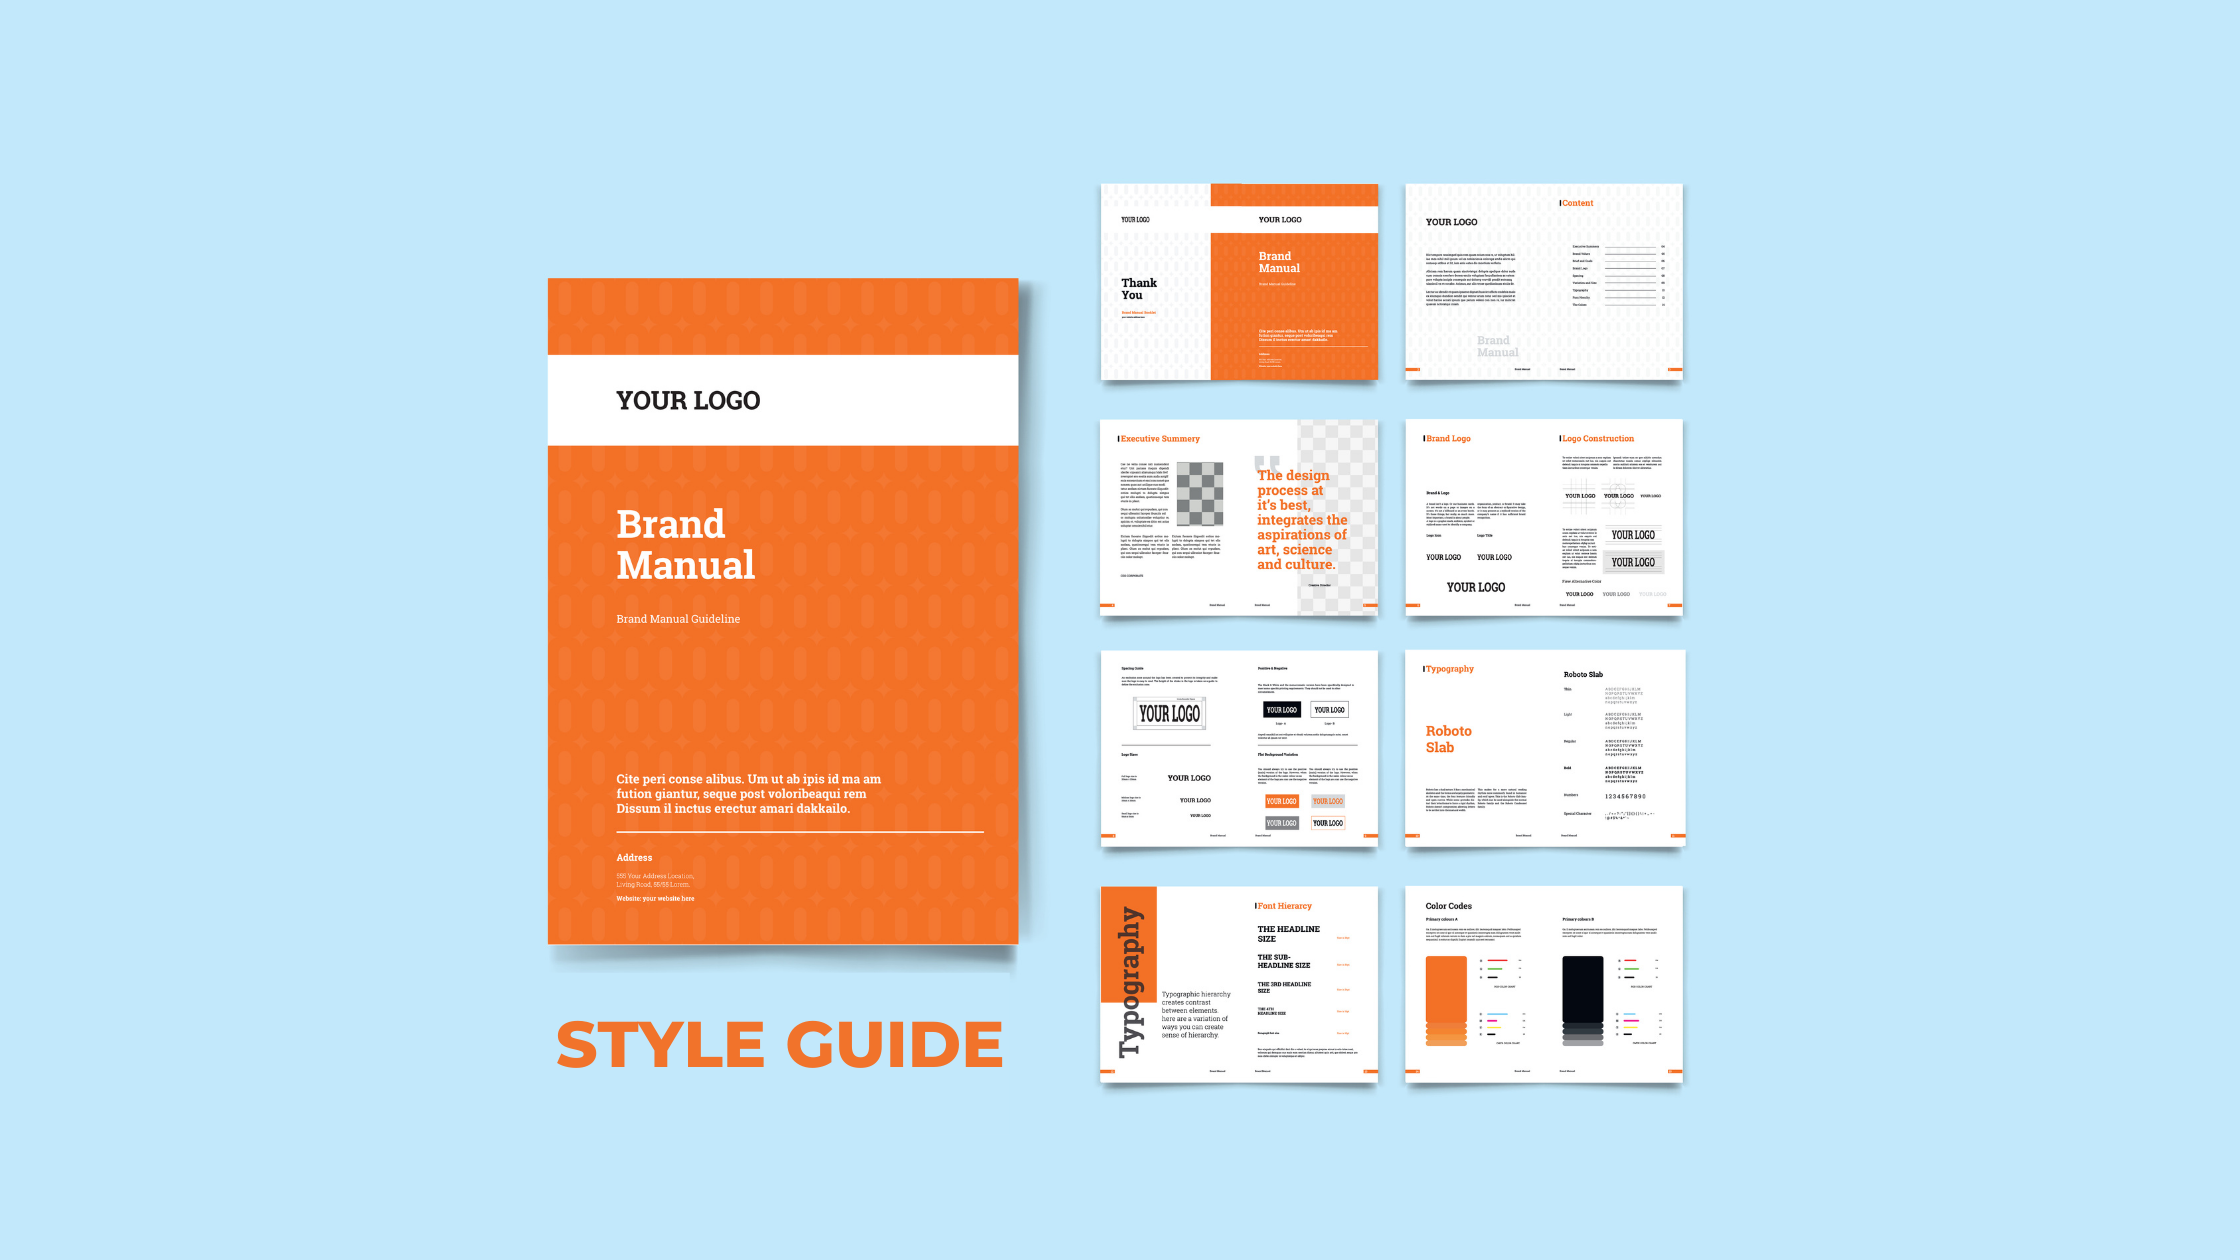 Style Guide: Why Your Small Business Needs One